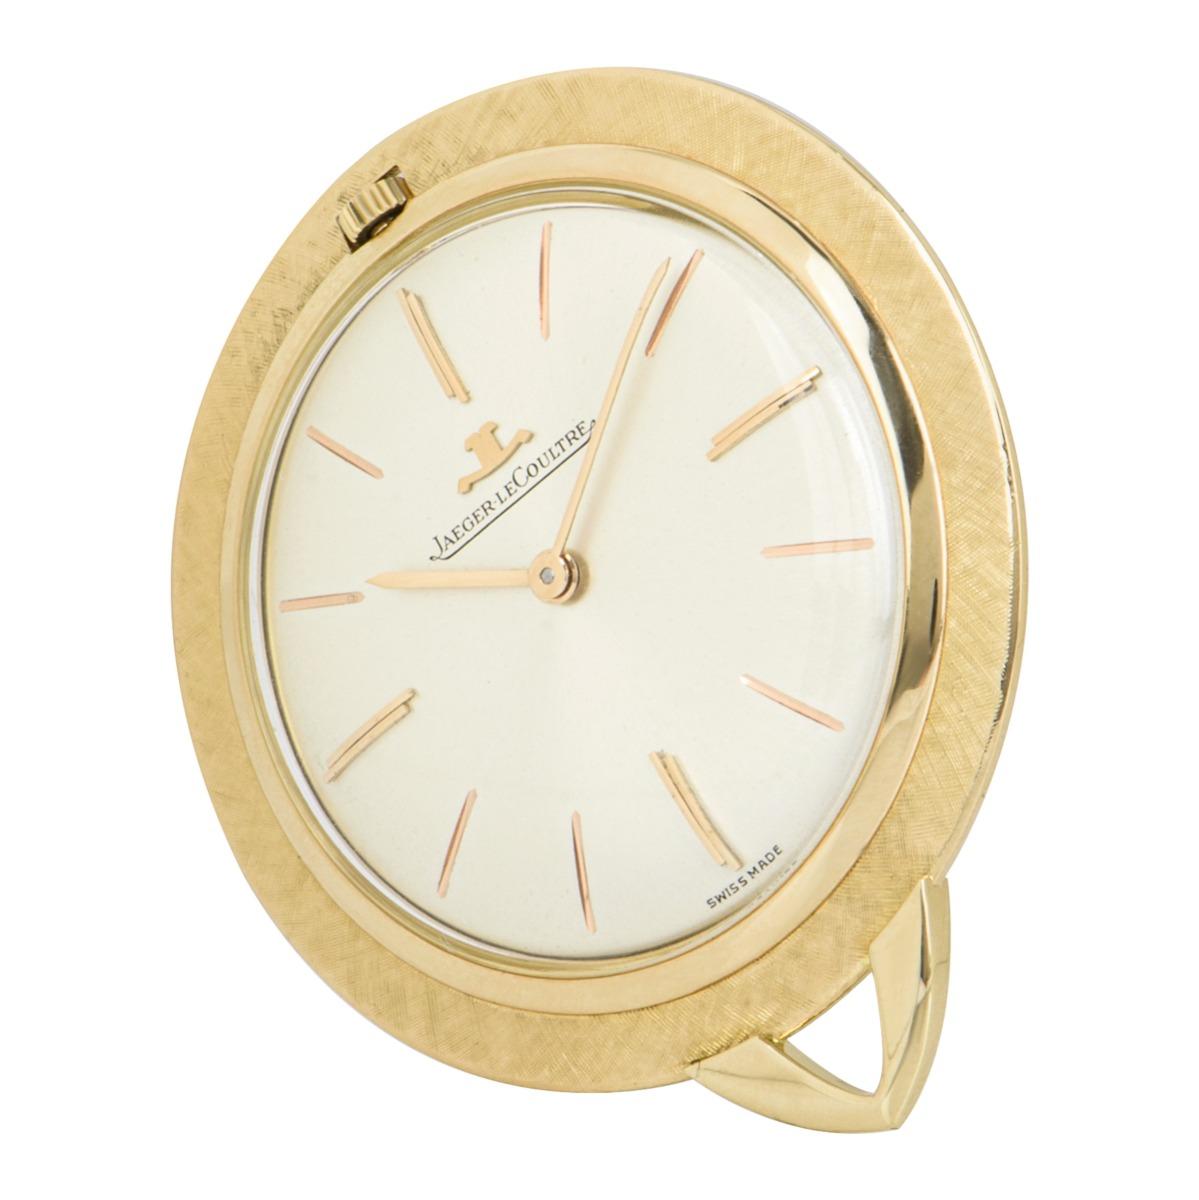 A 39 mm vintage pendant pocket watch by Jaeger LeCoultre, crafted from 18k yellow gold.

Featuring a silver dial with applied hour markers, a fixed 18k yellow gold bezel, plastic glass and a manual wind movement. There is also a pendant bale